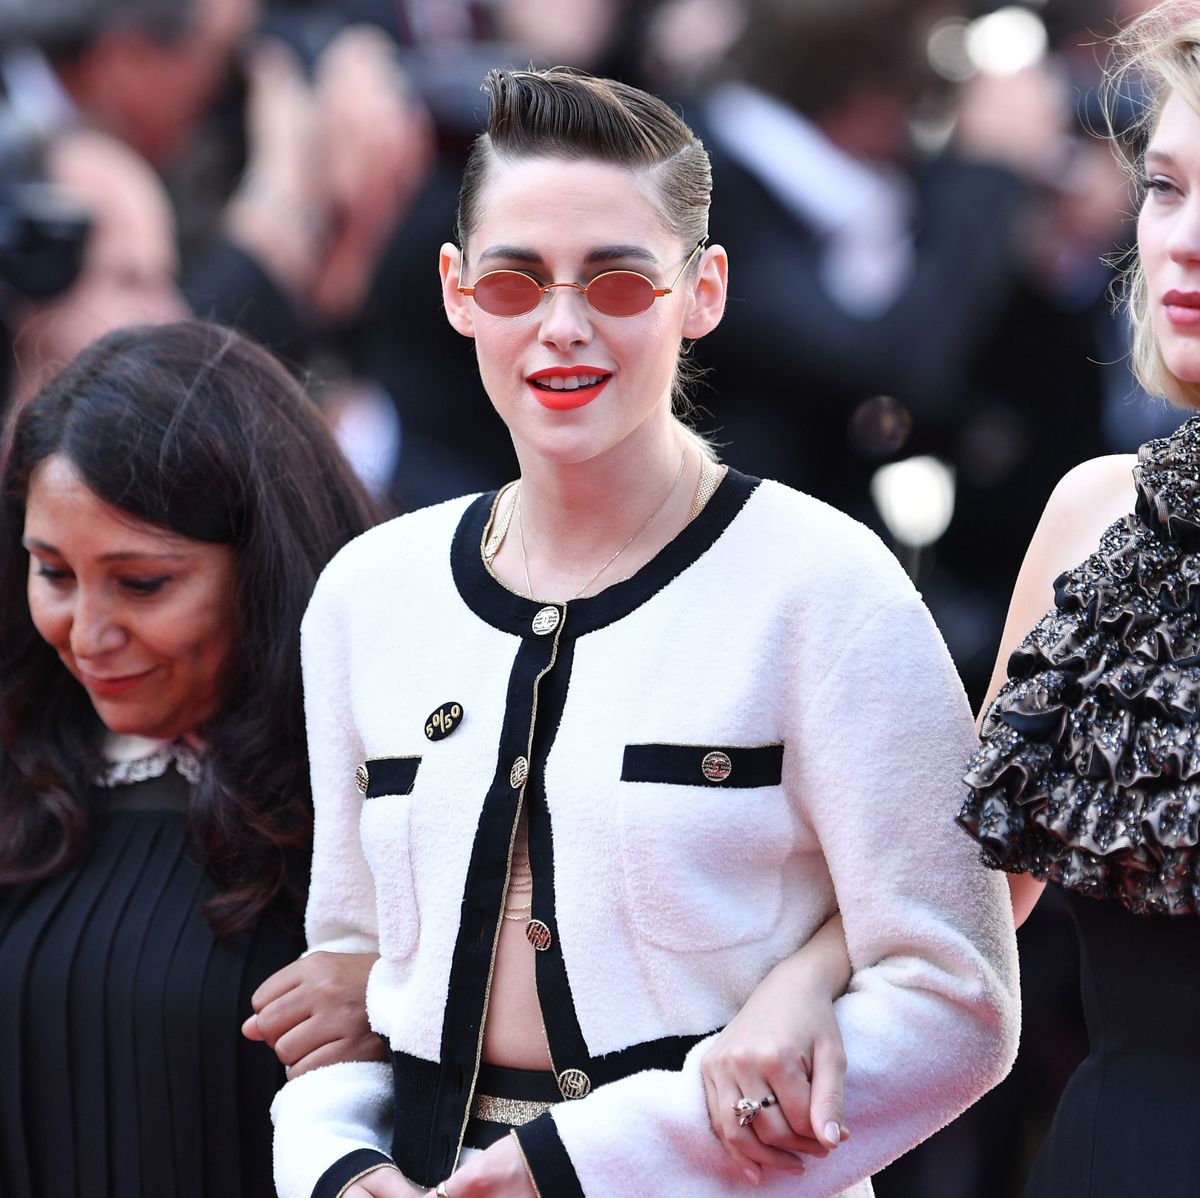 Here's how to look like Kristen Stewart, 28, who dazzled in a classic blue  tweed blazer in Cannes